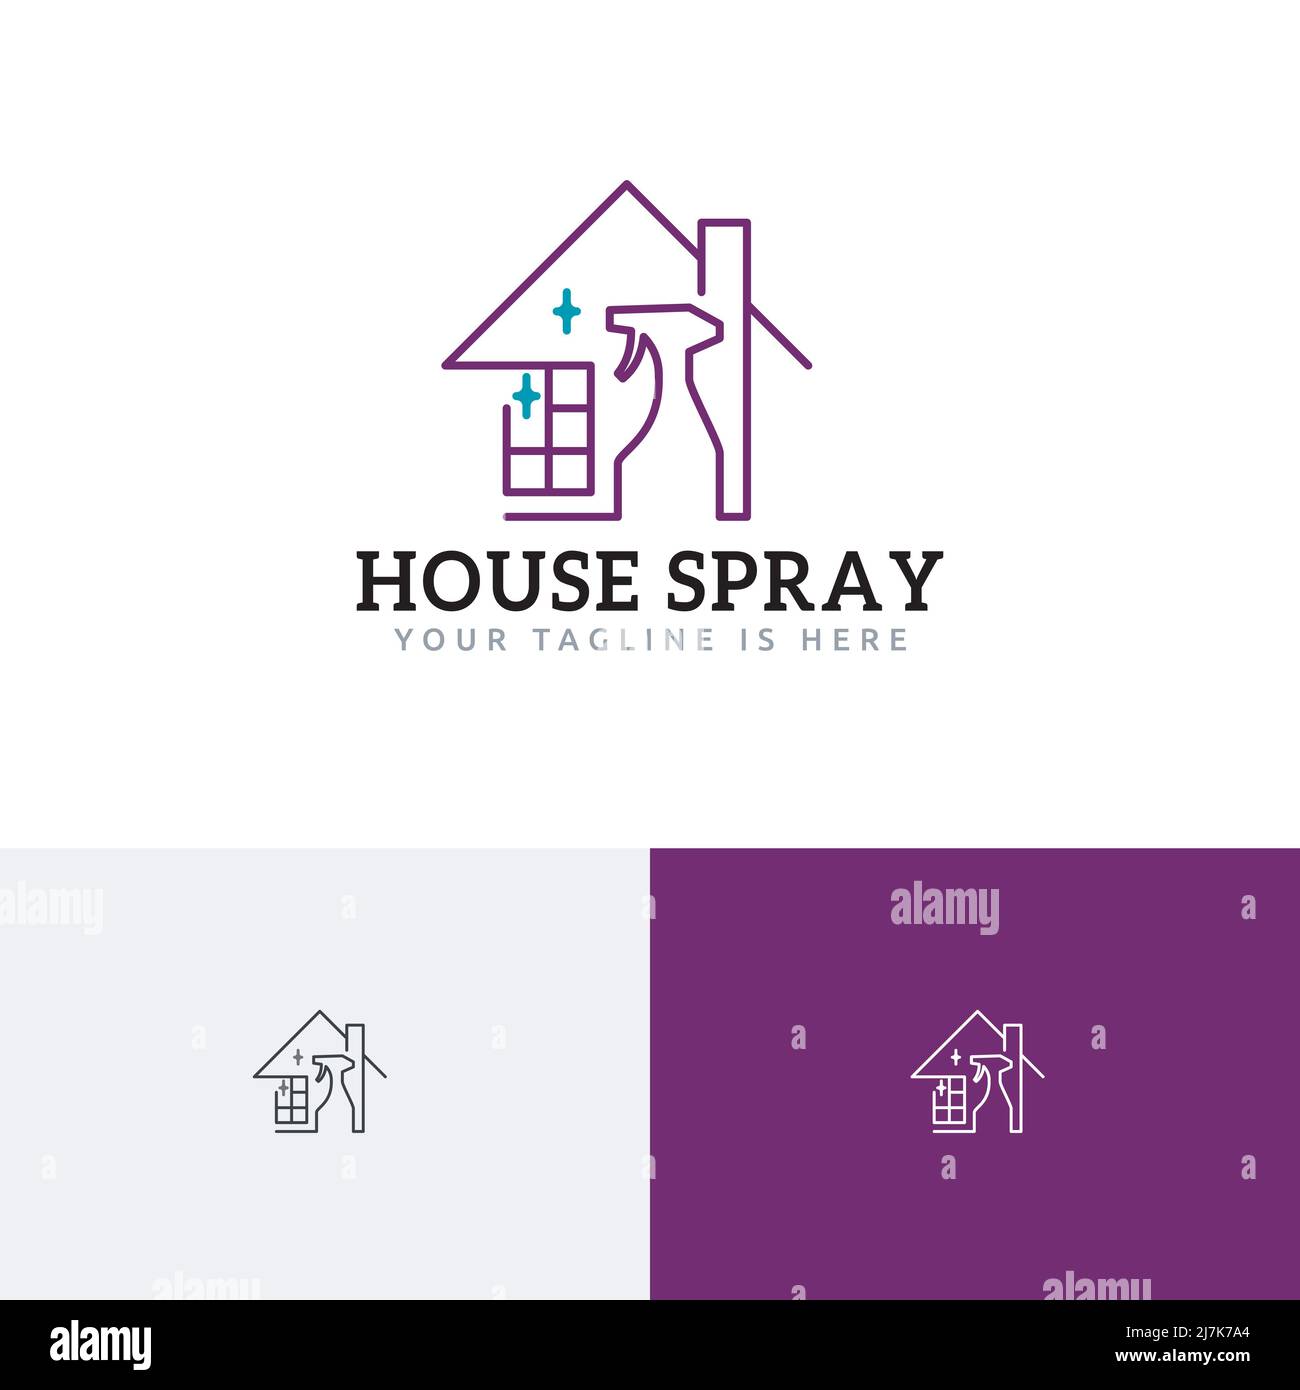 Clean Spray House Cleaning Service Line Style Logo Stock Vector